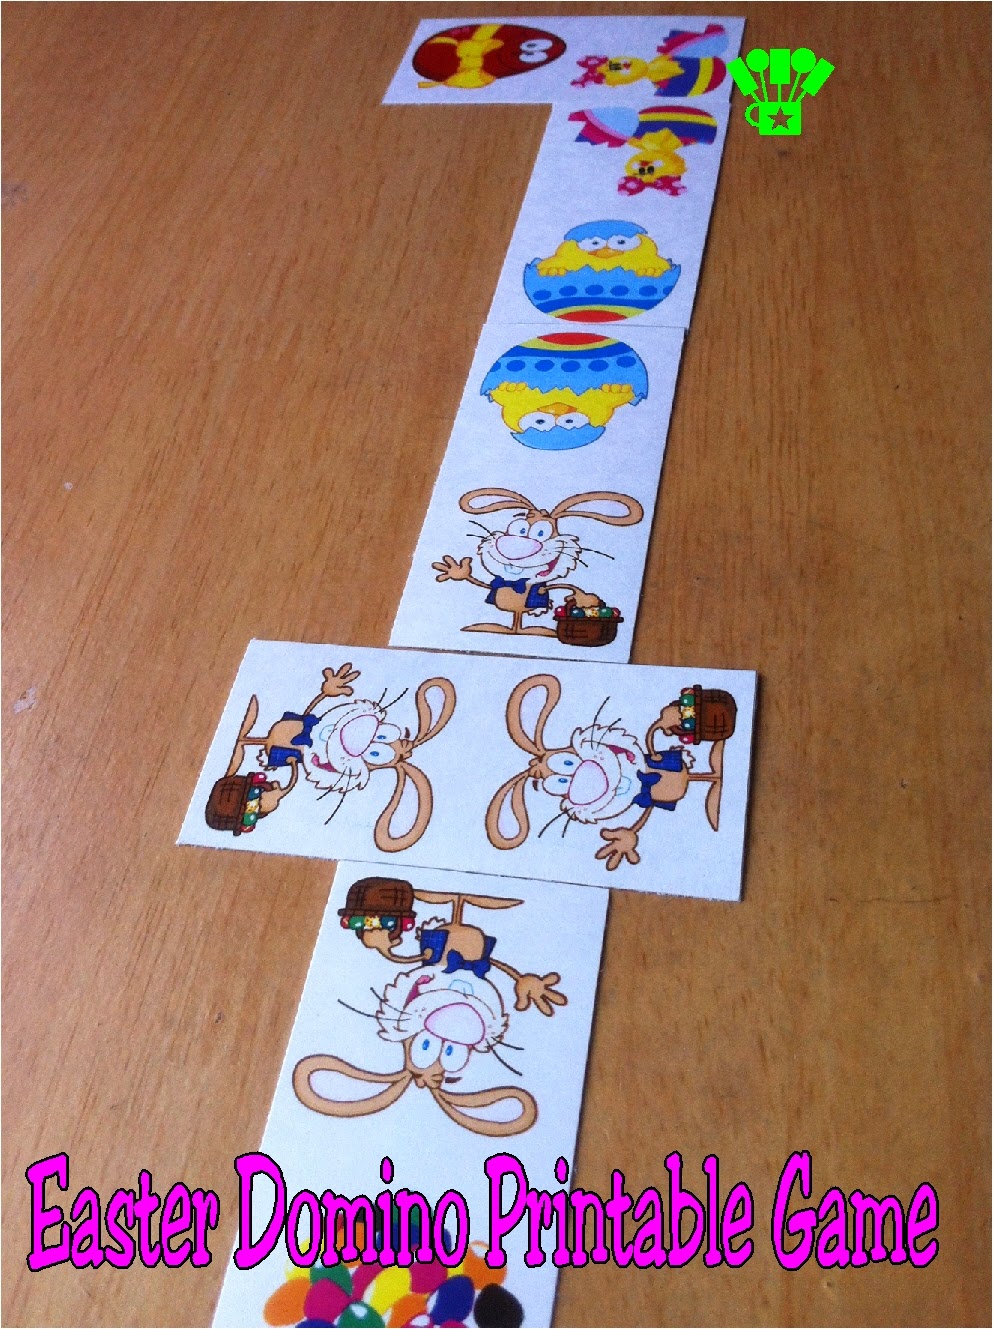 Easter Domino Printable Game by Kandy Kreations